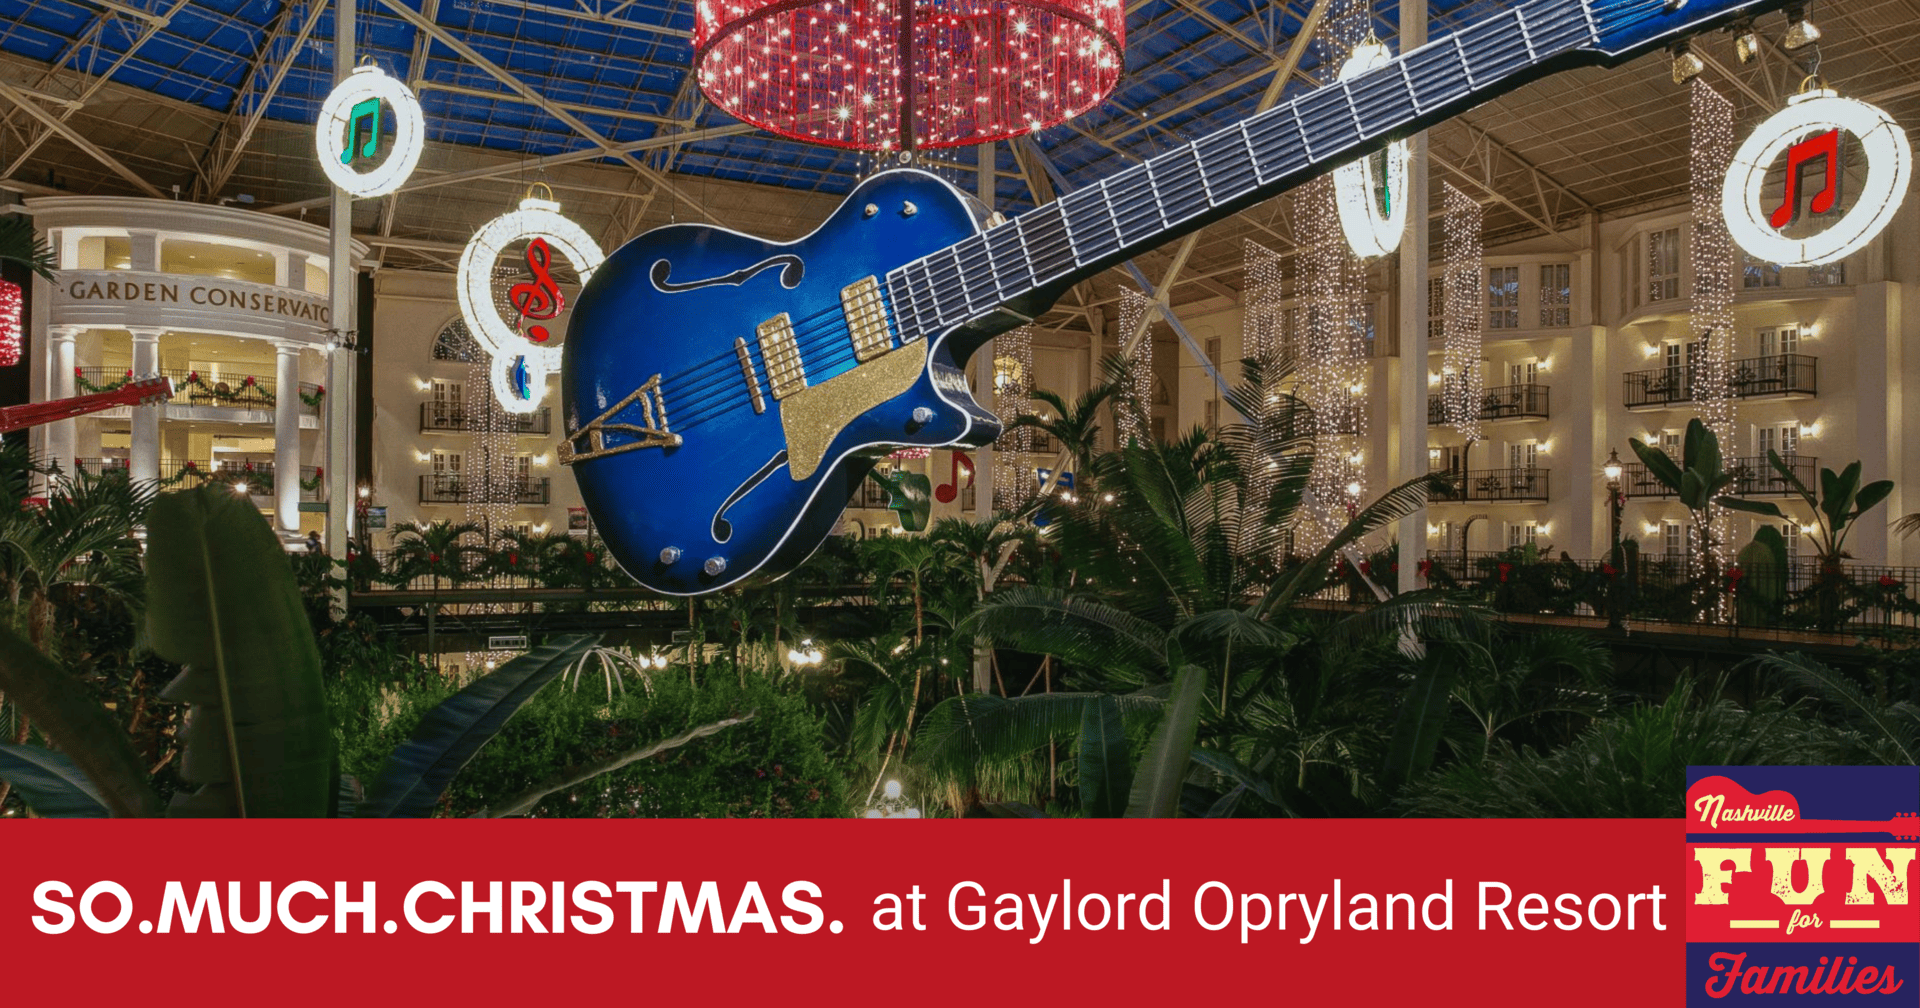 Opryland Hotel Events Calendar 2022 Celebrate Christmas (2020) With The Gaylord Opryland In Nashville